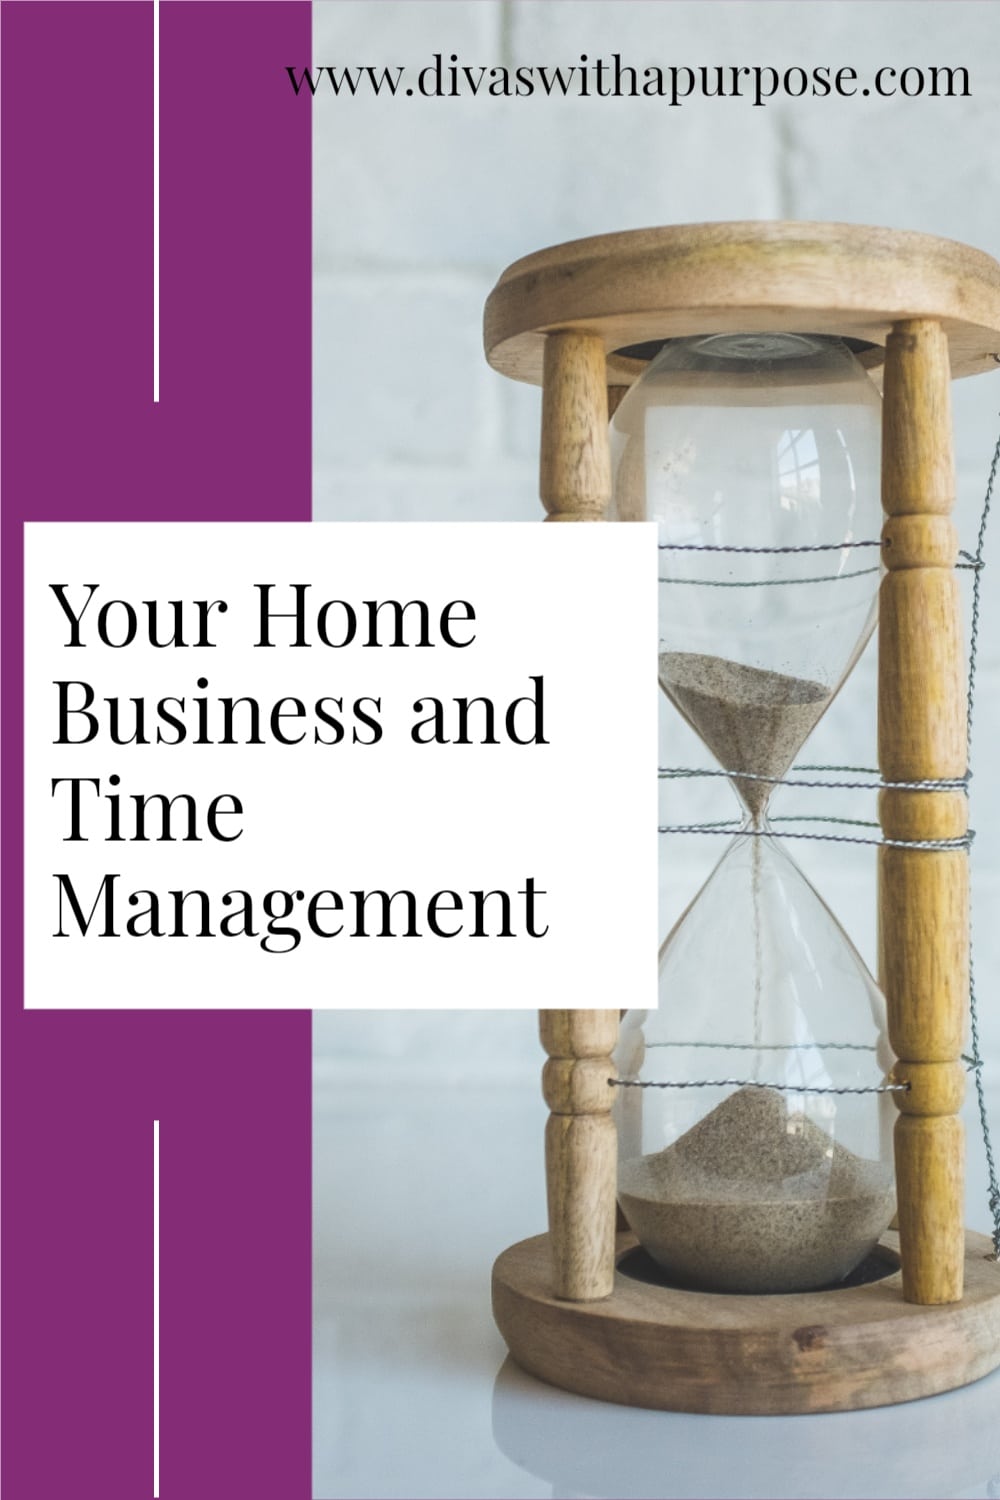 Your Home Business and Time Management go hand-in-hand. Here are tips to help you show up intentionally in your business and get more done.